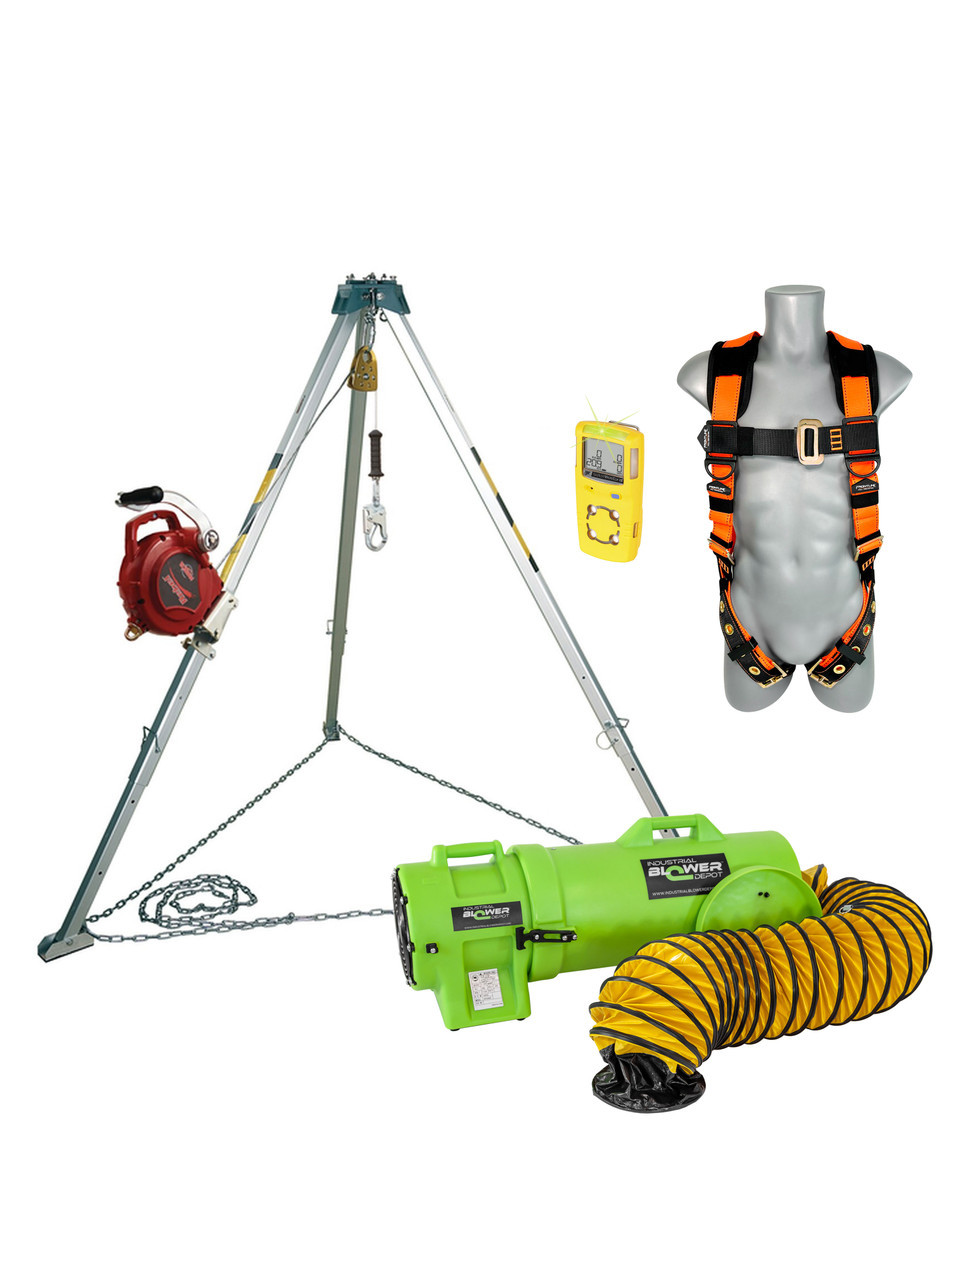 3M Protecta Premium Confined Space Kit Rescue System Complete